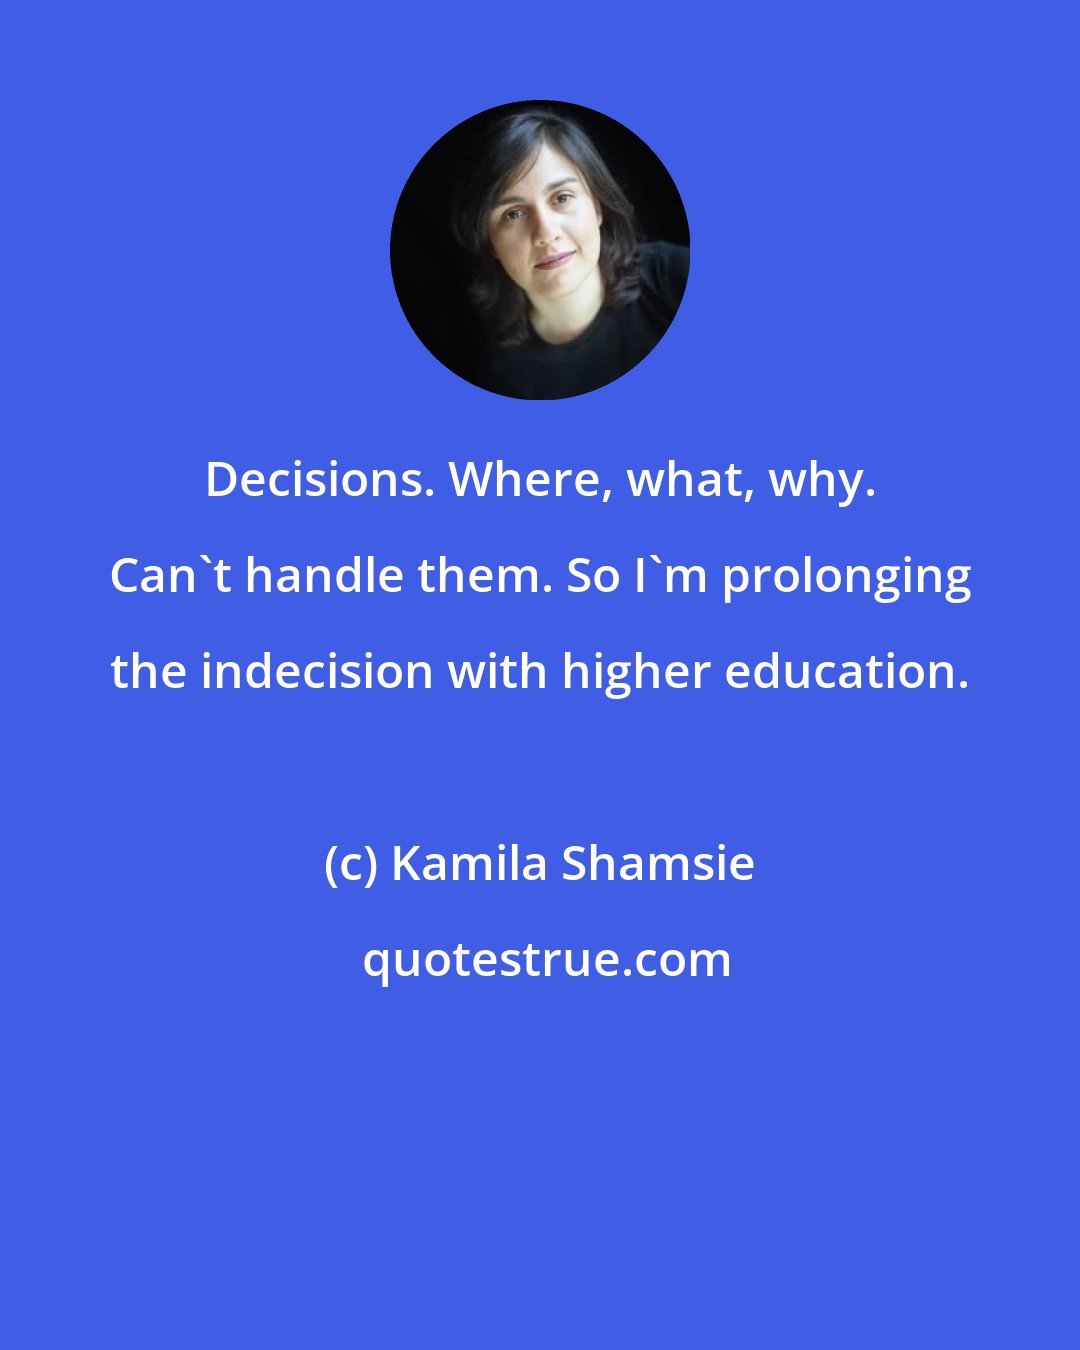 Kamila Shamsie: Decisions. Where, what, why. Can't handle them. So I'm prolonging the indecision with higher education.